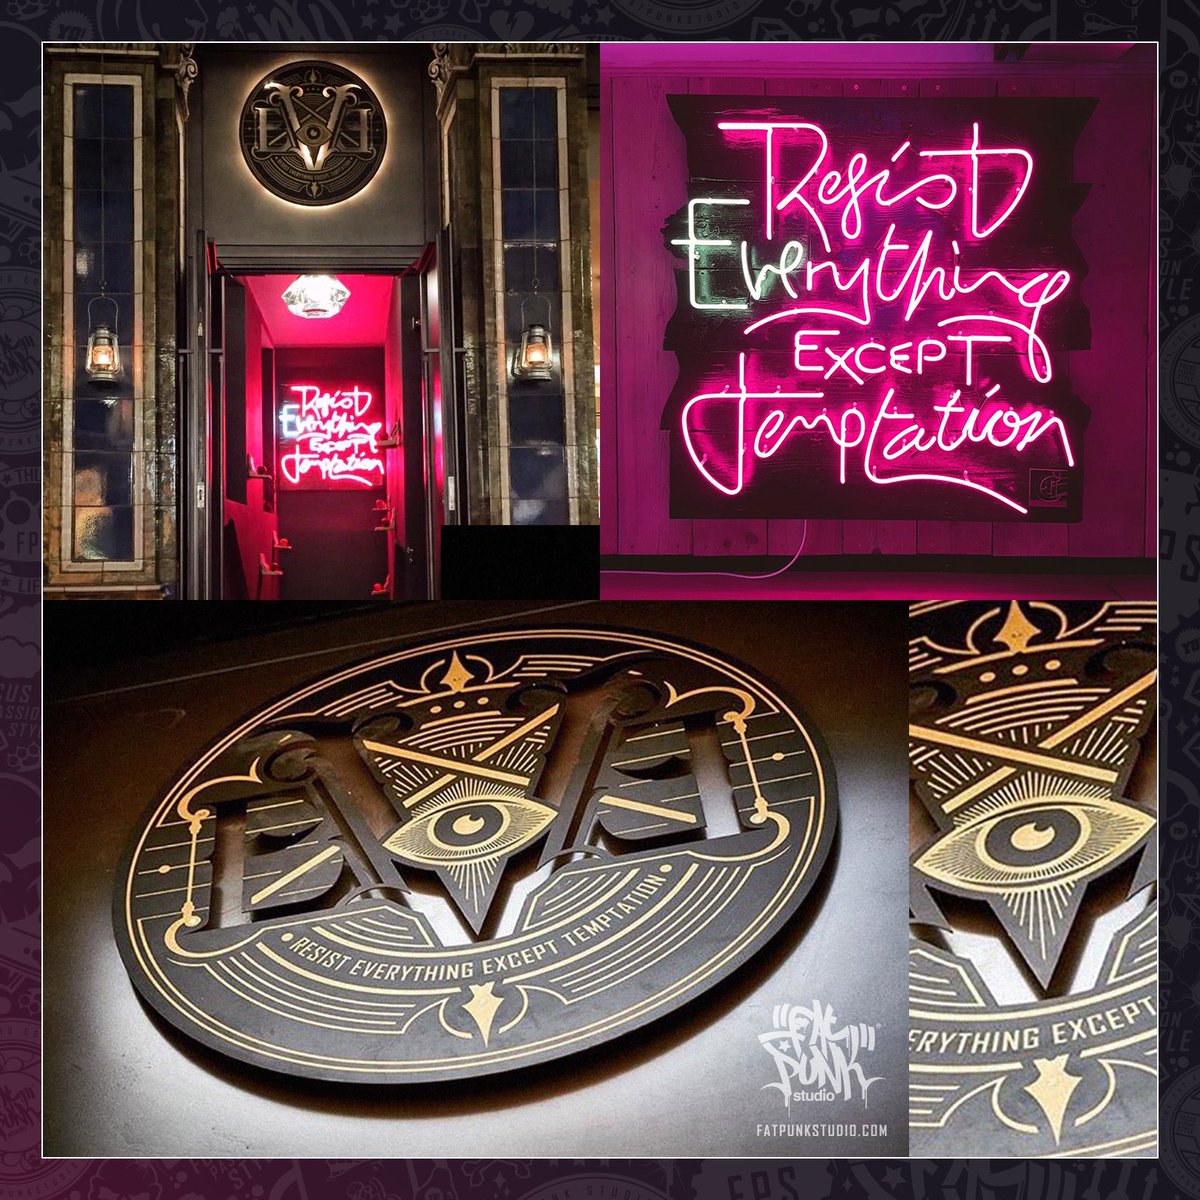 Exterior #design for #EveBarlondon 👁️🥃🍹🍸 Which #cocktail can you not resist?  
•
Hire us for your #project:
fatpunkstudio.com
•
#bar #londonbar #cocktailbar #cocktails #cocktail #exteriordesign #signage #london